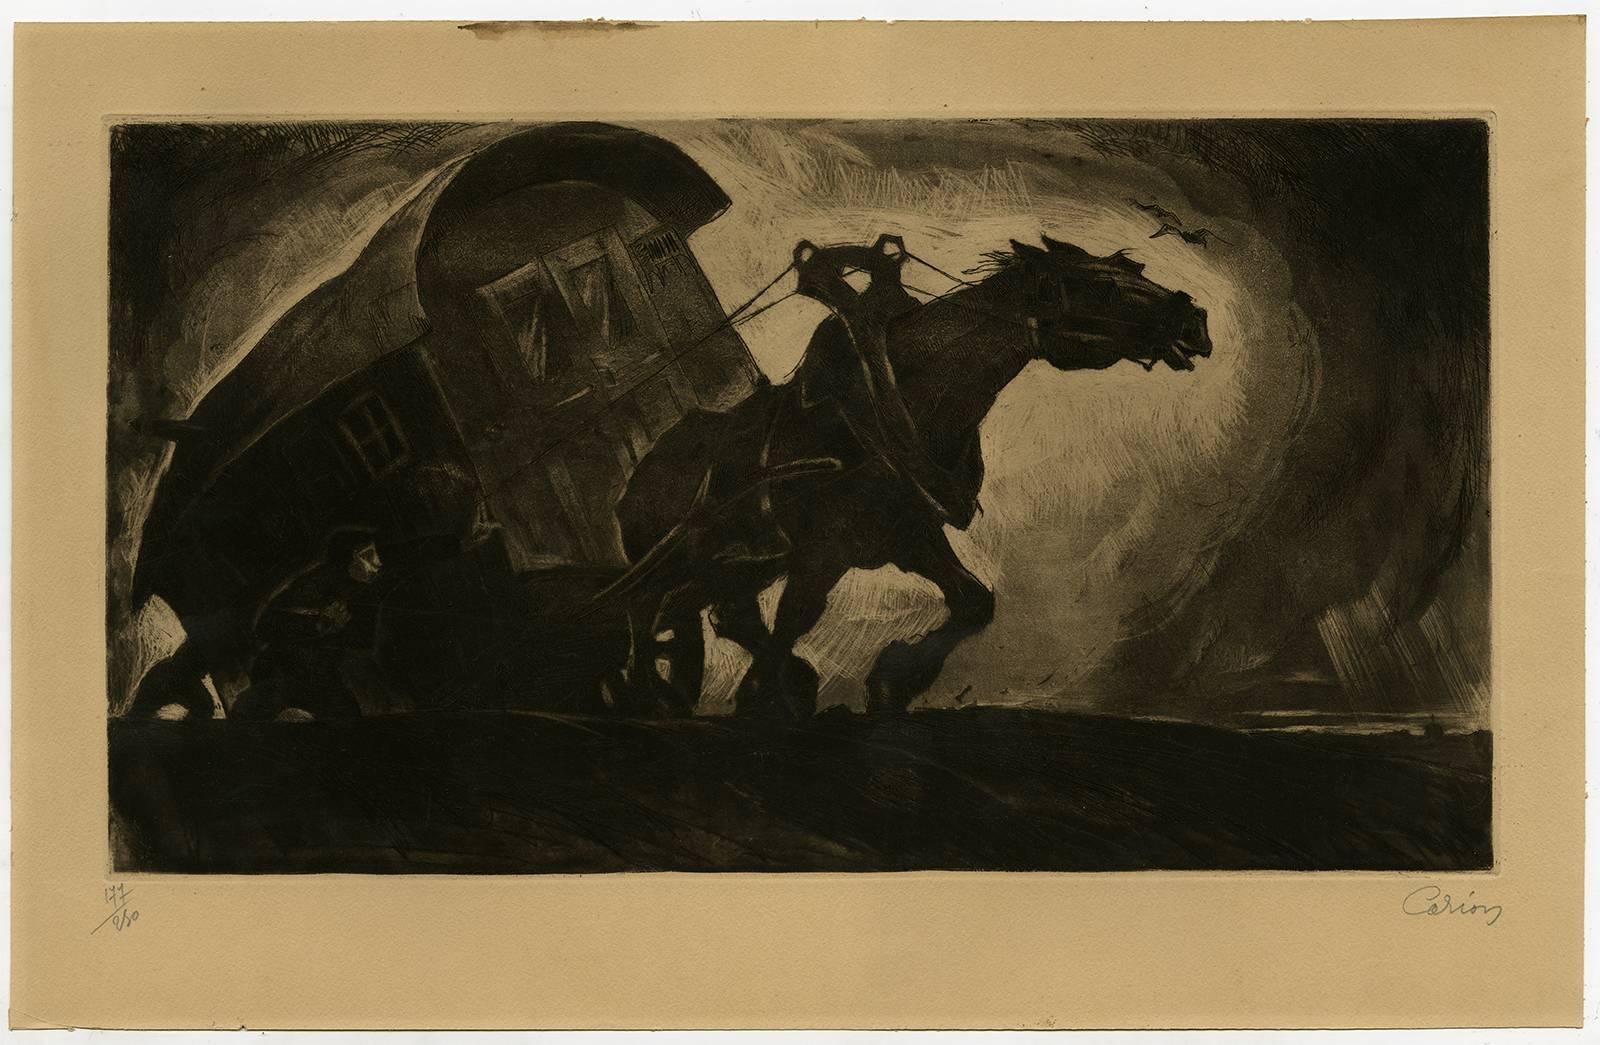 Marius Carion Animal Print - Untitled - A wagon pulled by a horse.